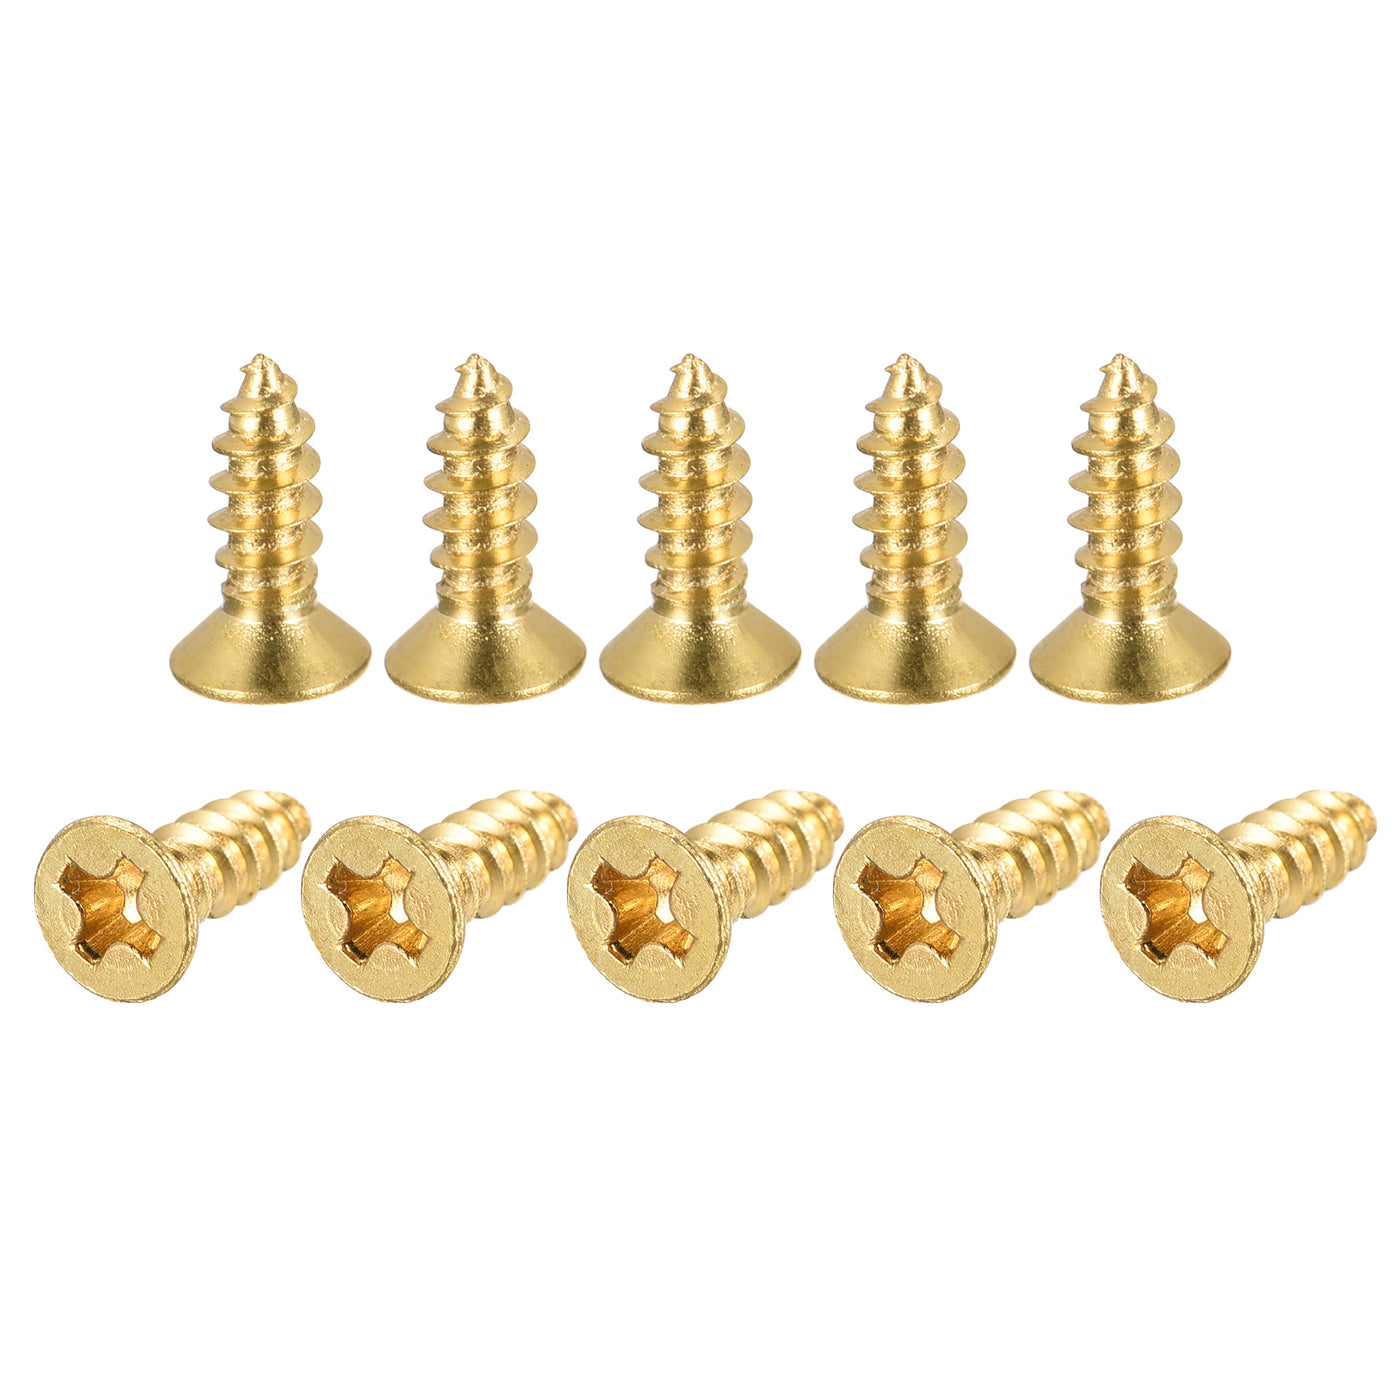 uxcell Uxcell Brass Wood Screws, M3x10mm Phillips Flat Head Self Tapping Connector for Door, Cabinet, Wooden Furniture 100Pcs